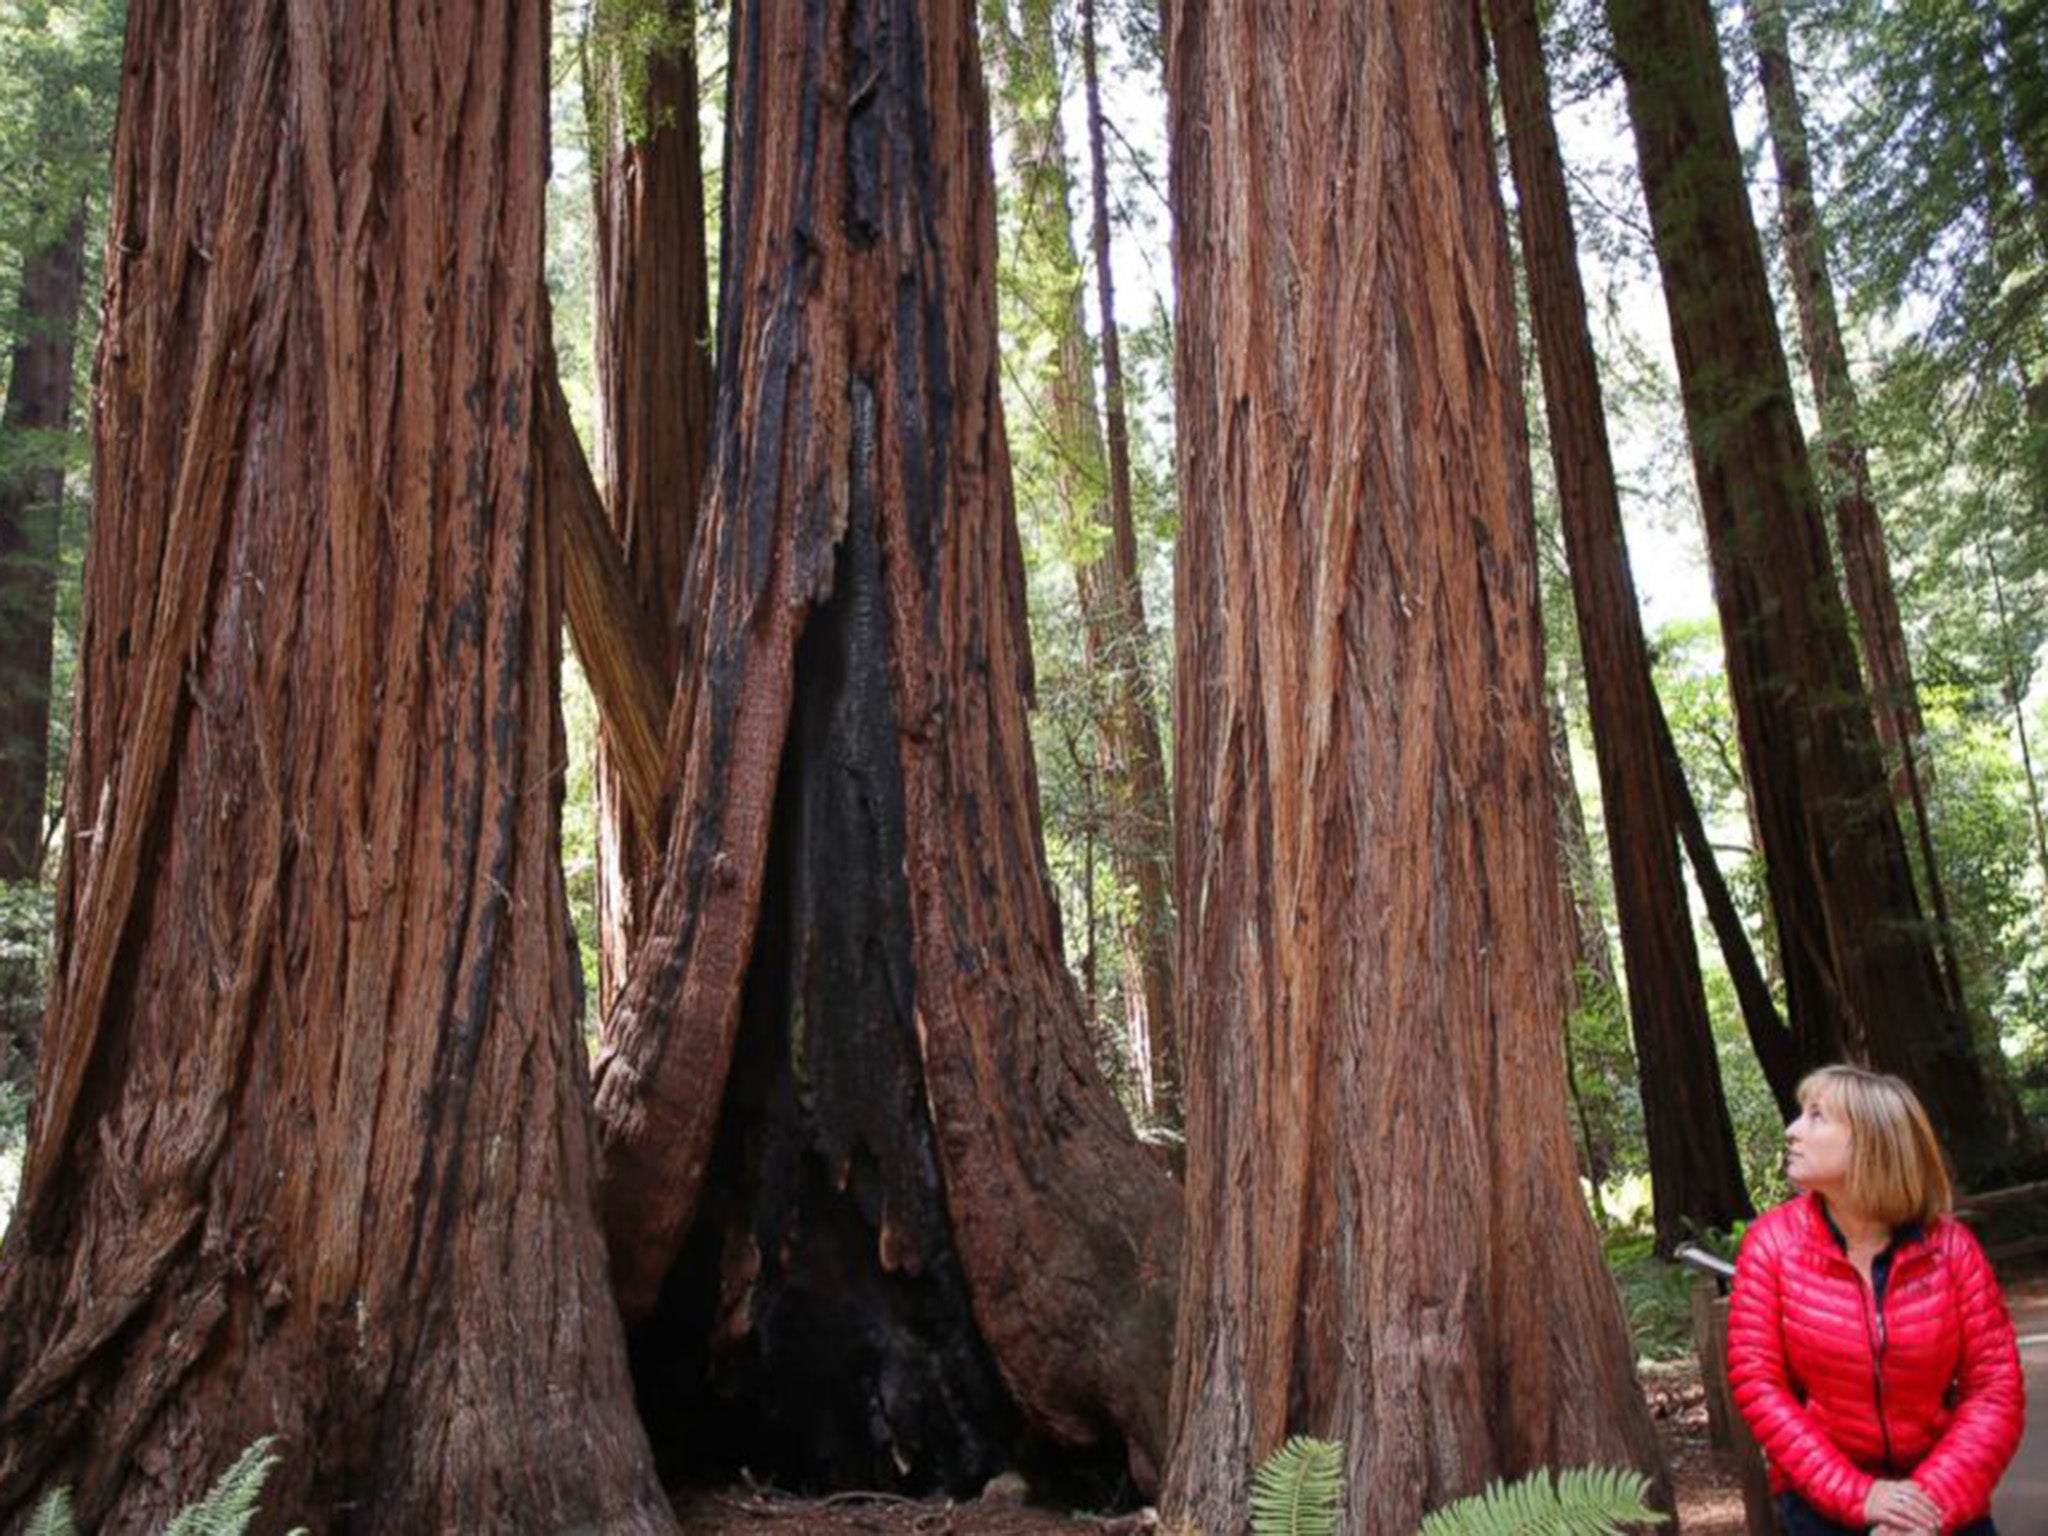 Emily Burns, Director of Science with Save the Redwoods League, sits near Redwoods at the Muir Woods National Monument